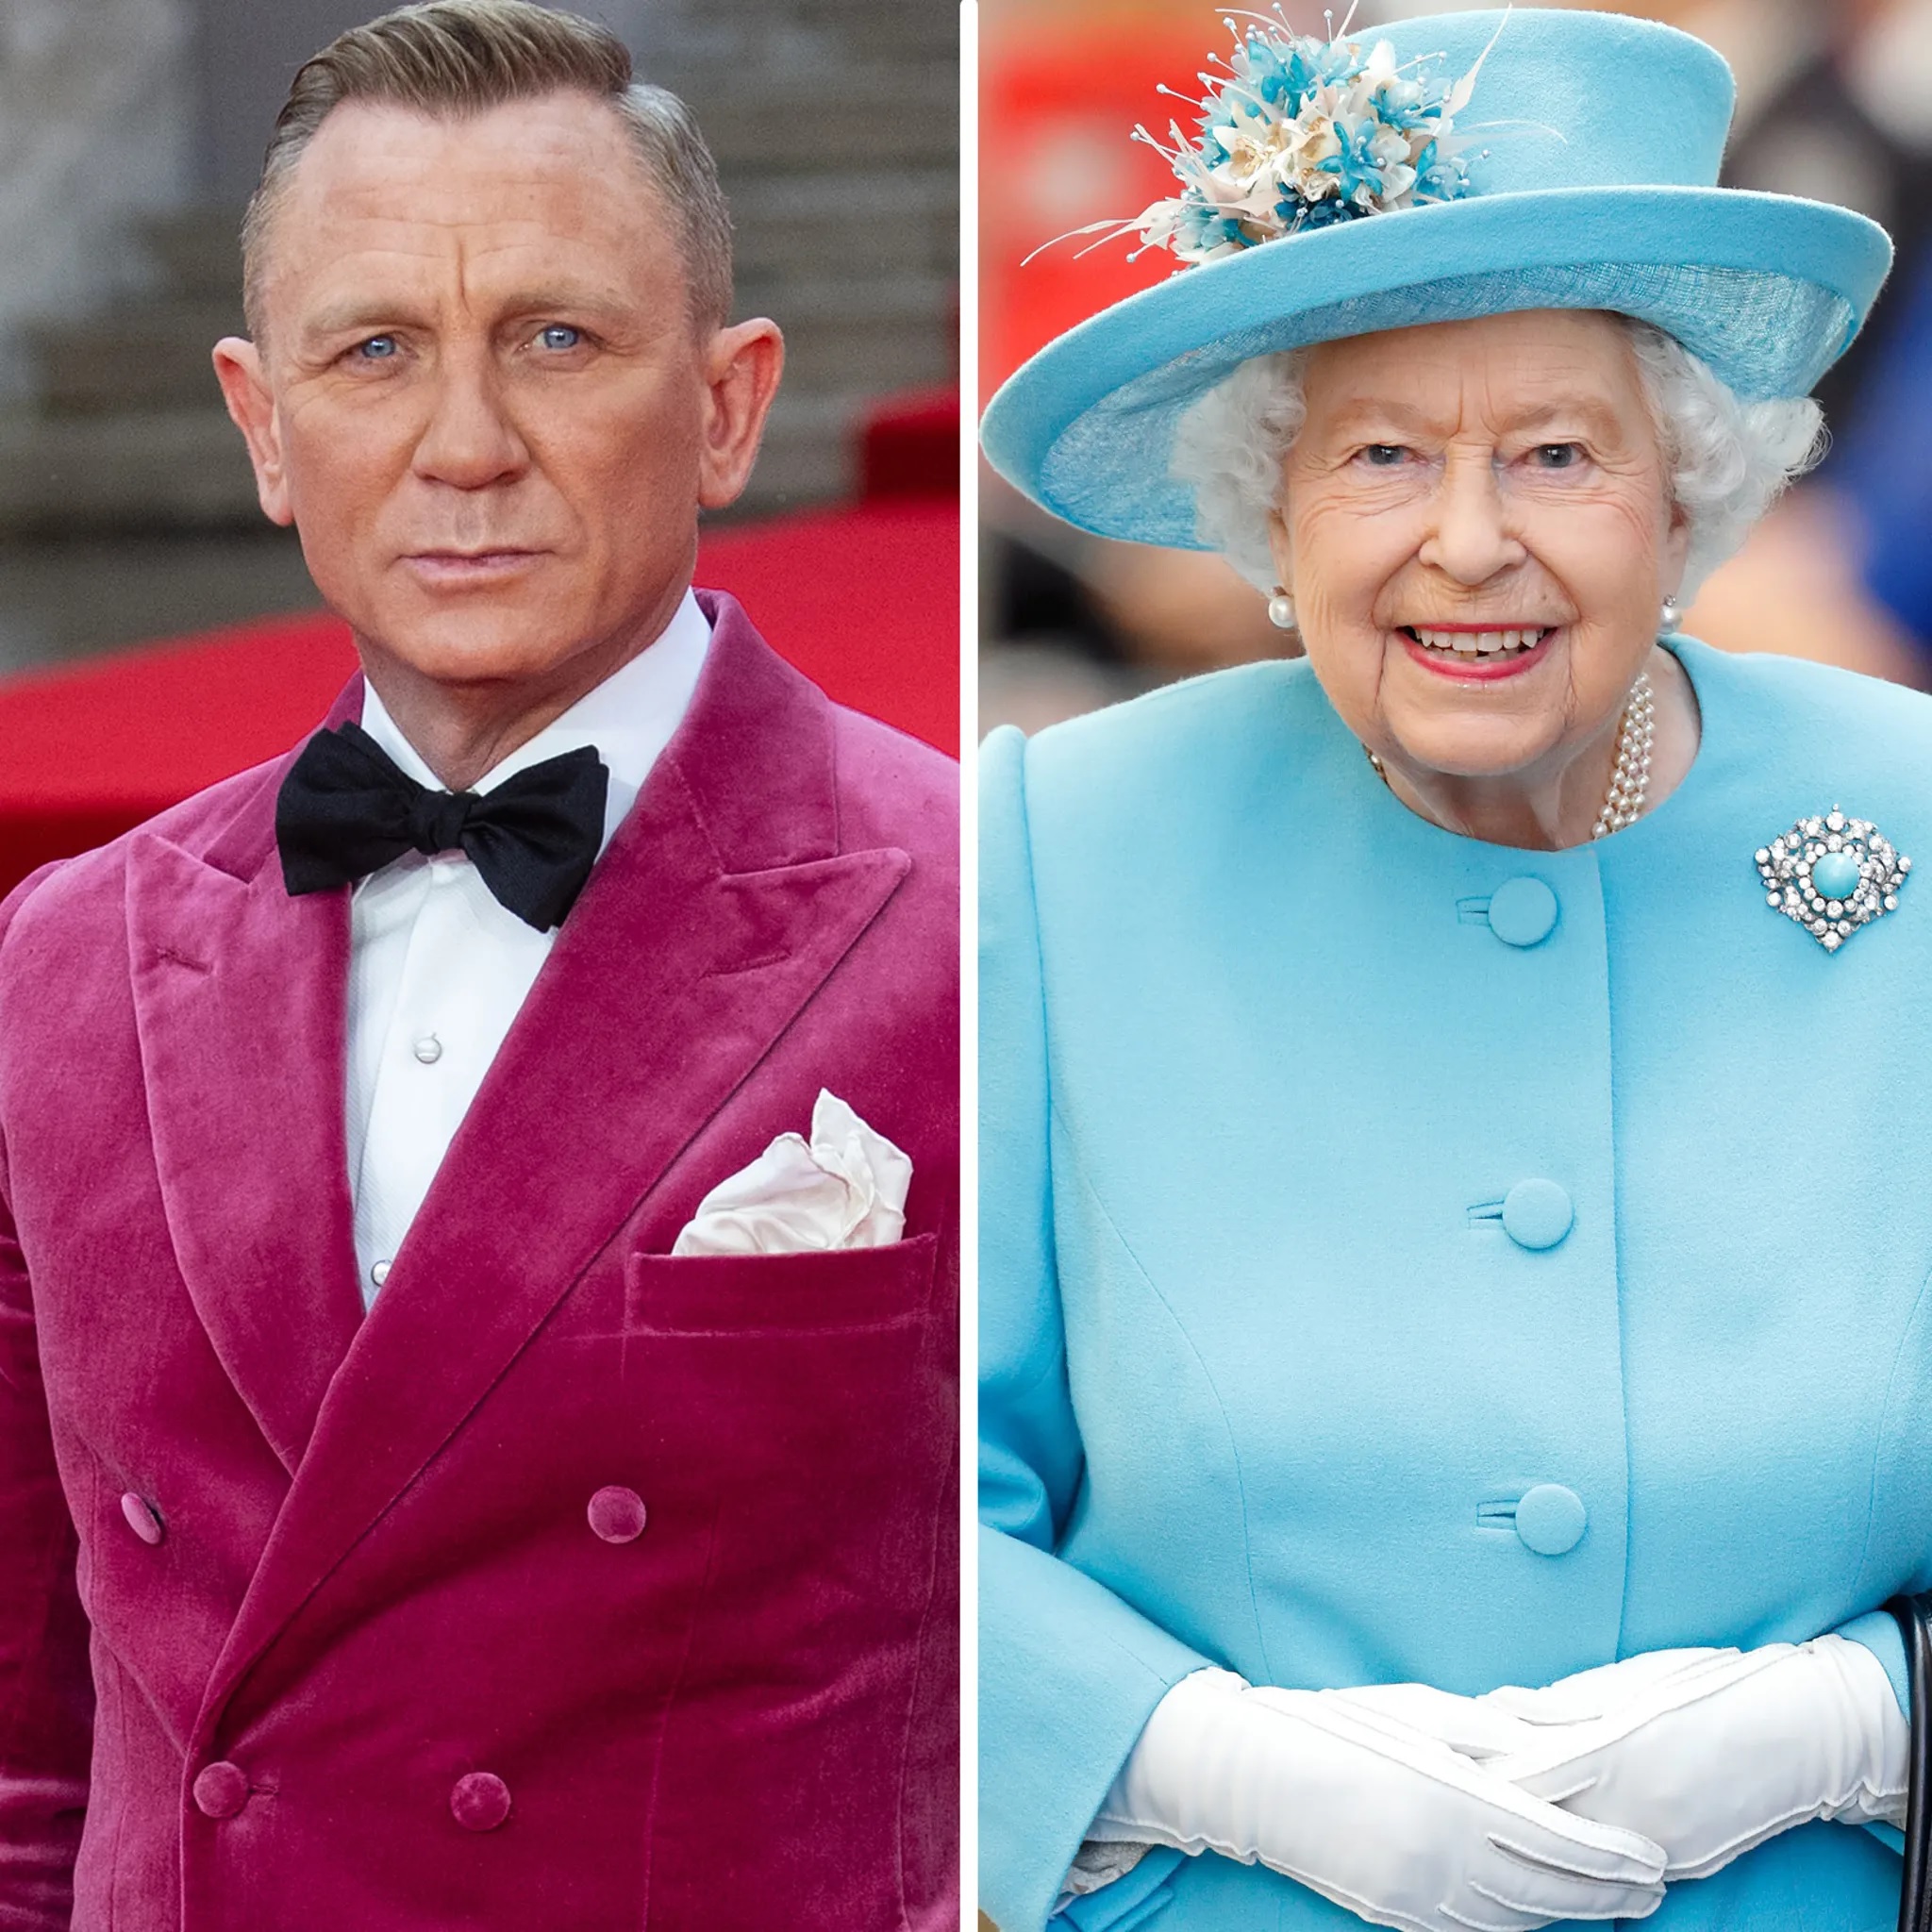 The Queen’s secret: How Elizabeth II hid her Olympics 2012 skit with Daniel Craig from the royal family